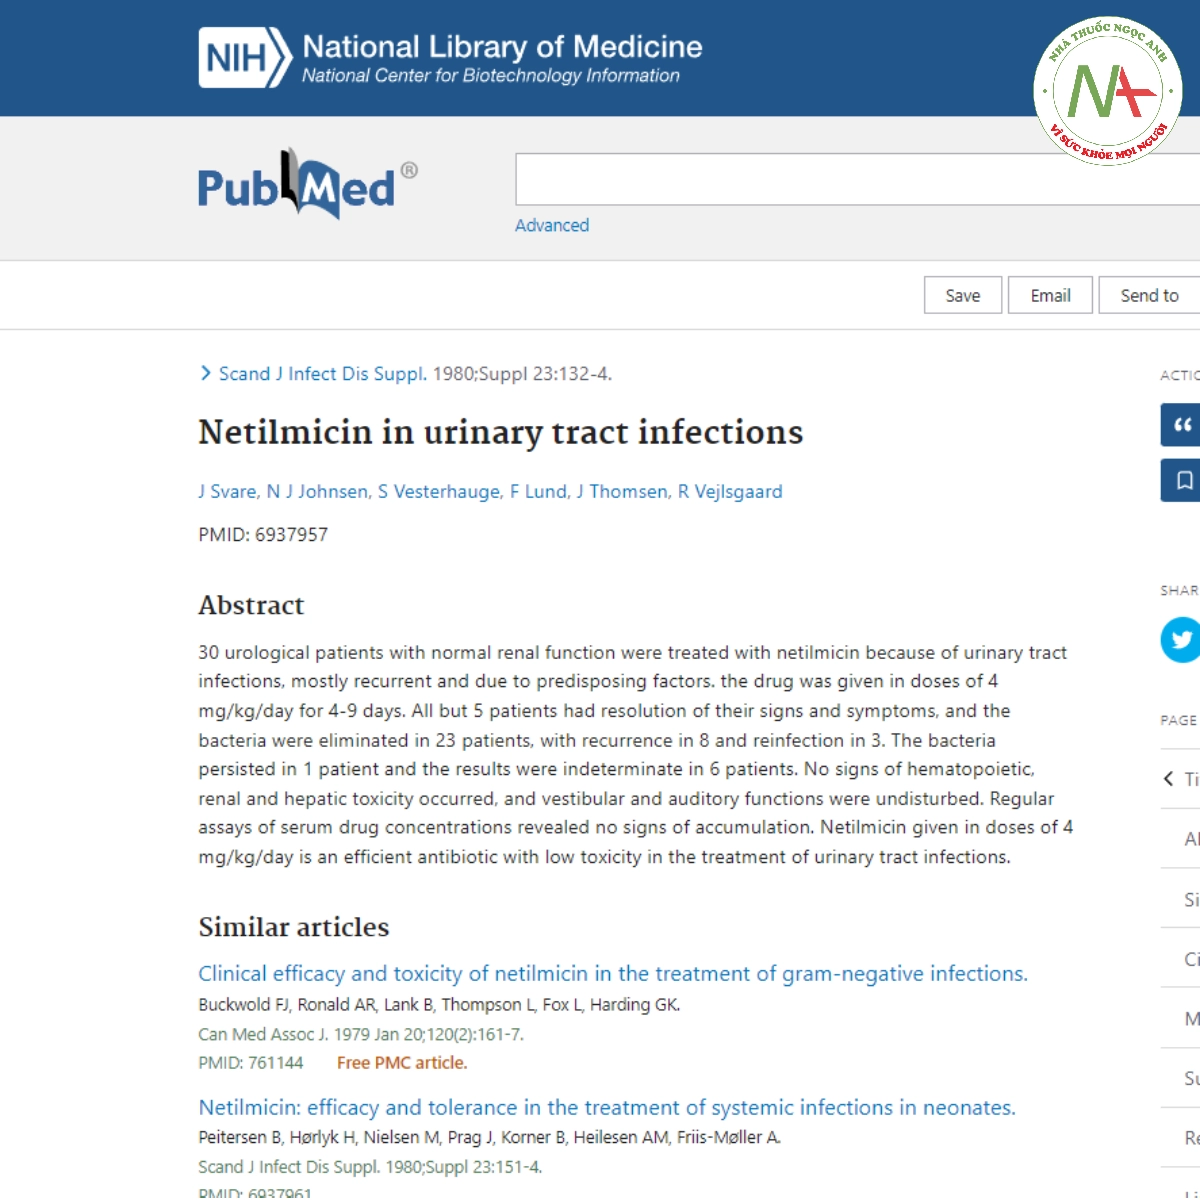 Netilmicin in urinary tract infections